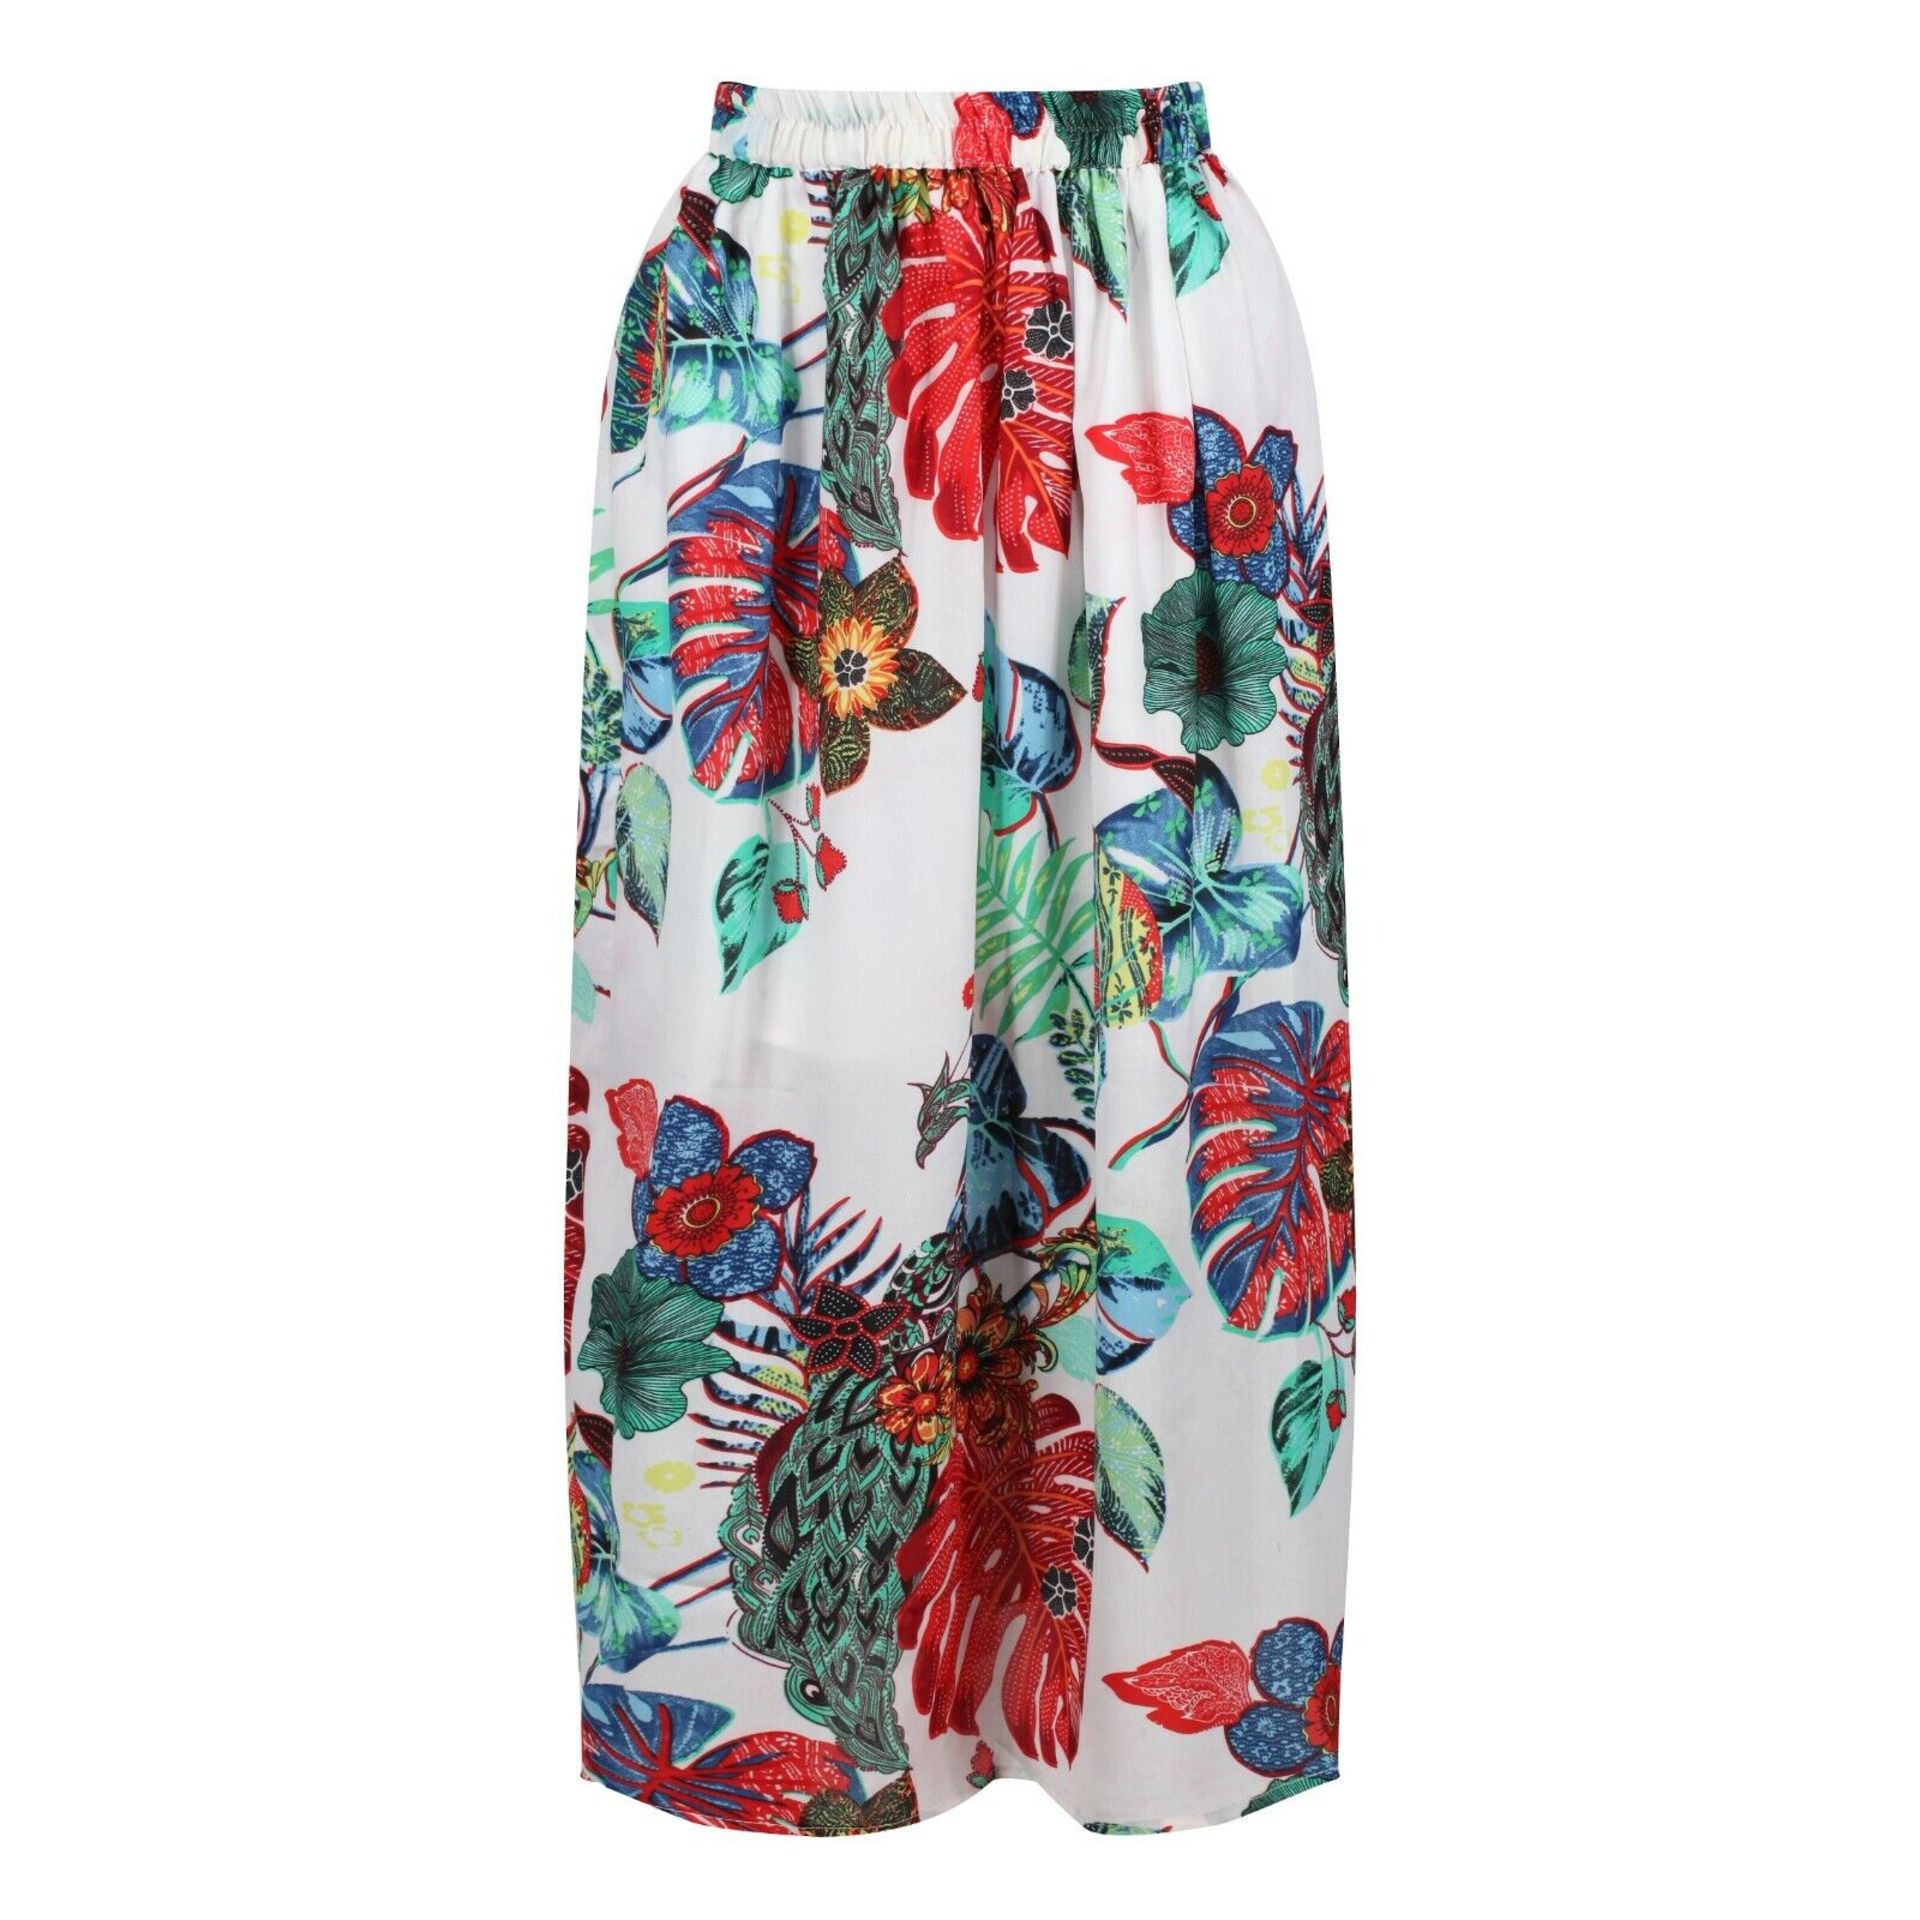 30 x New Women's Skirts Trousers Clothing Fashion - Image 7 of 8